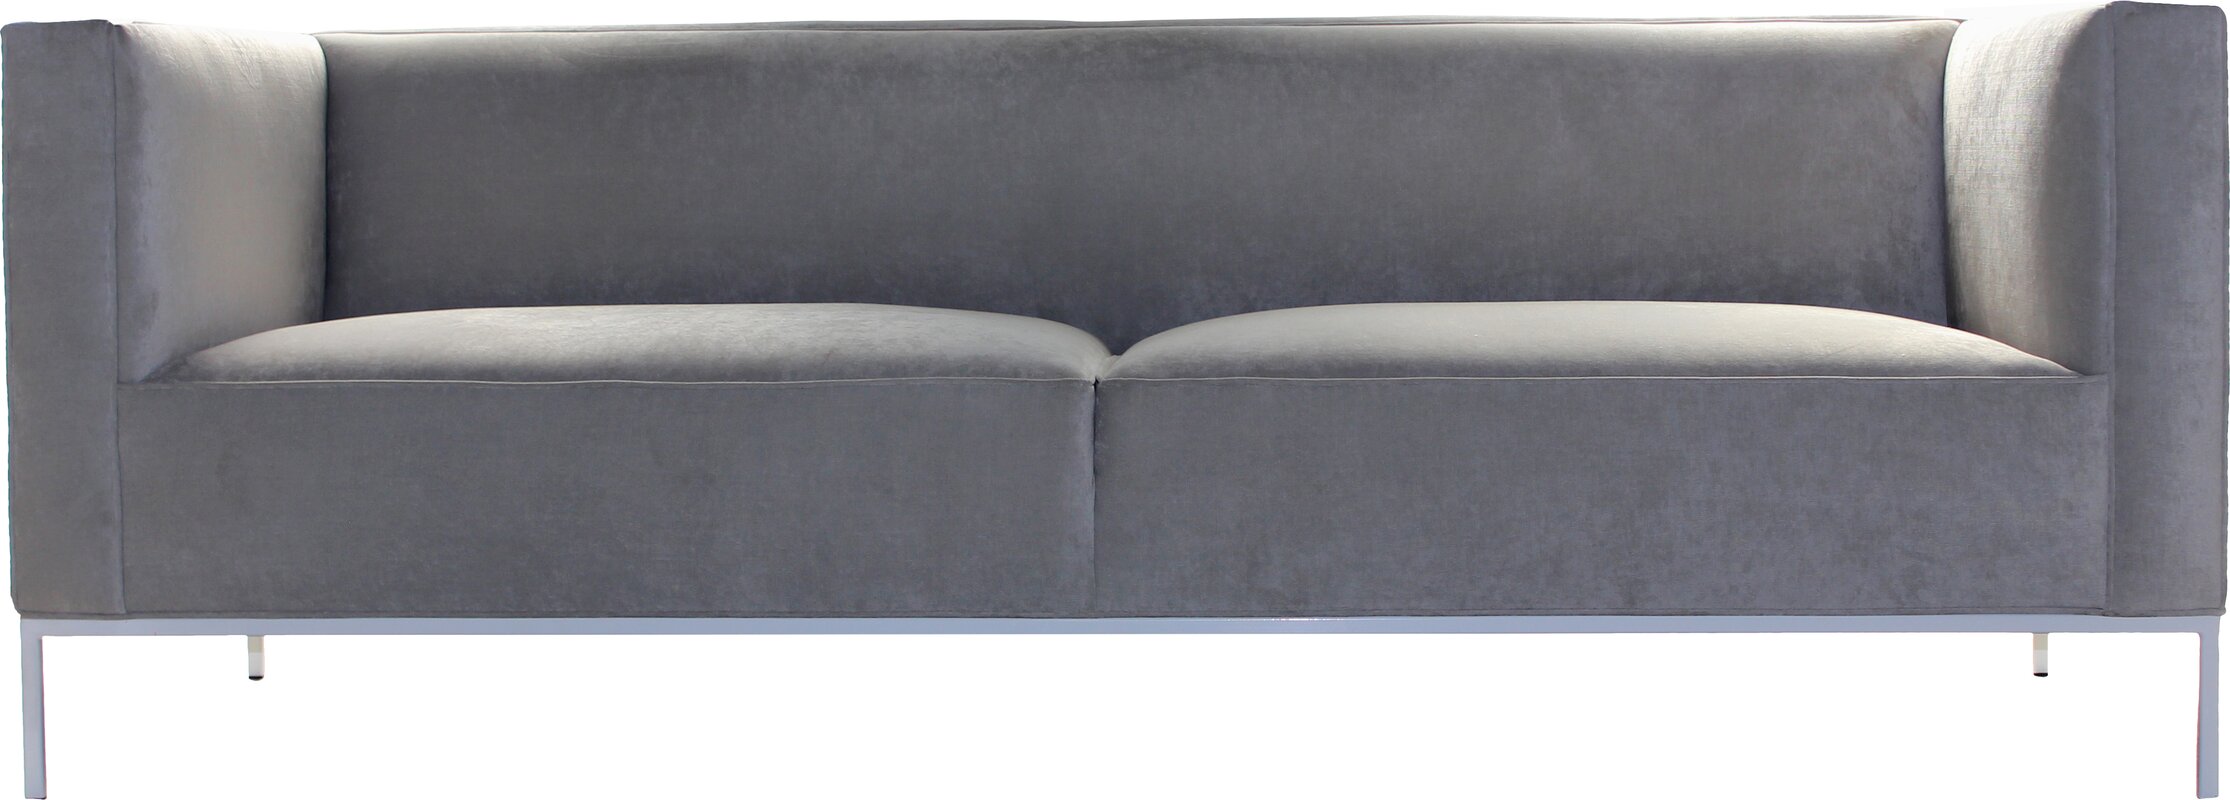 lacy sofa bed review